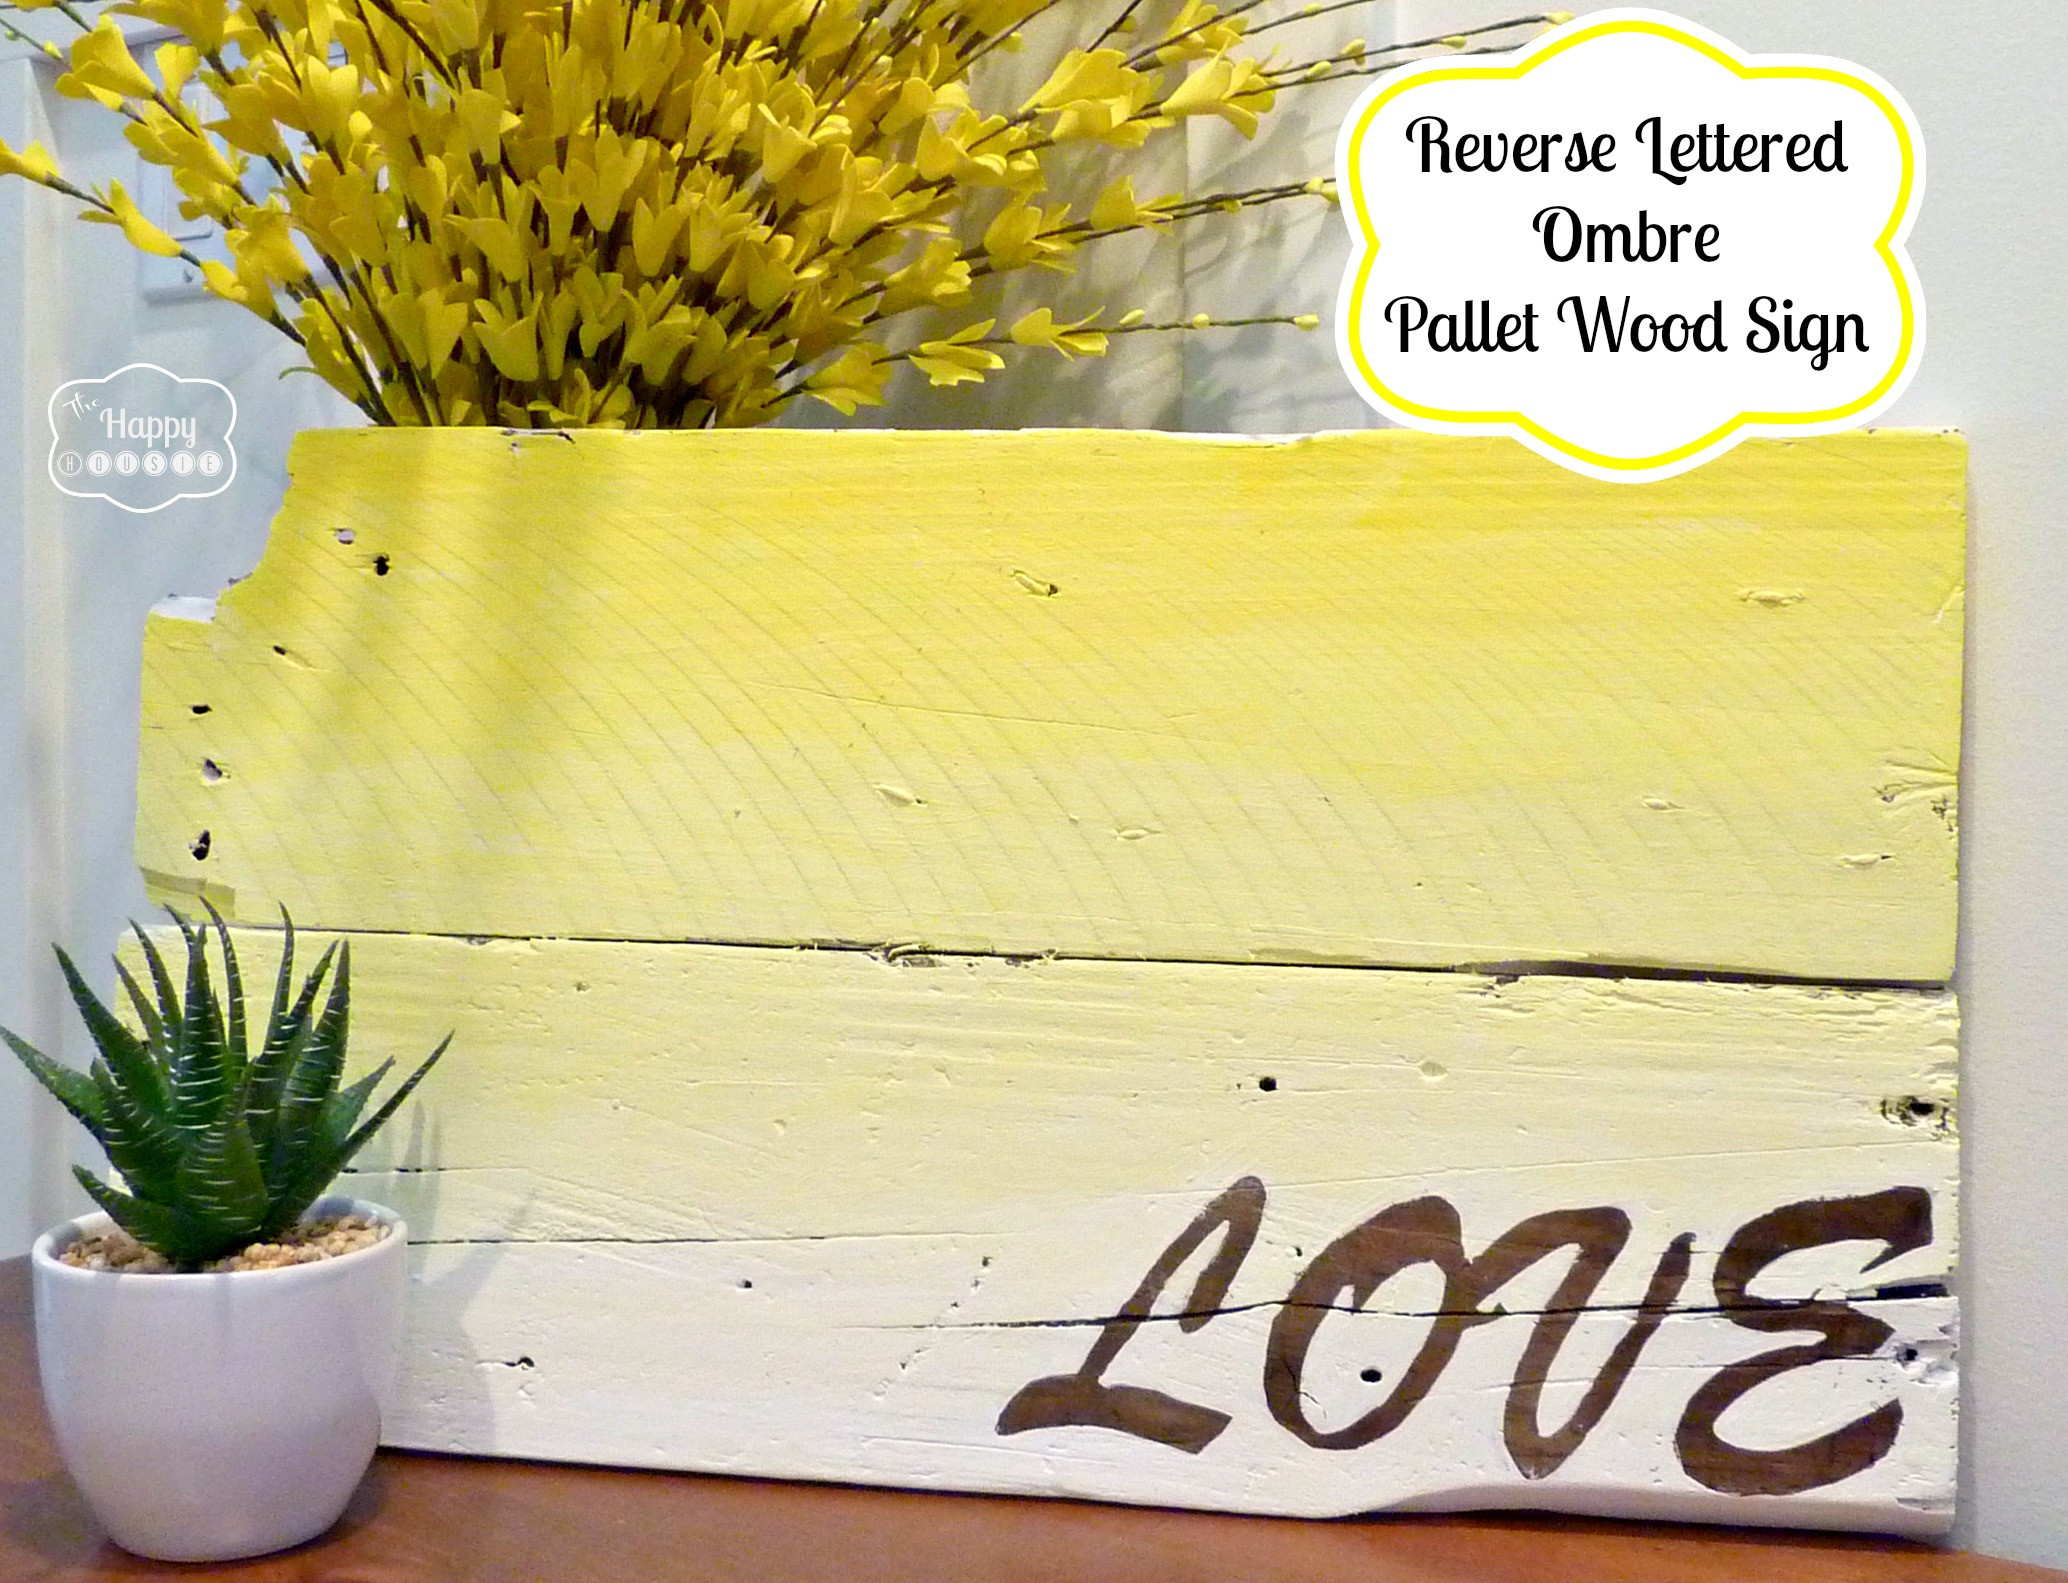 DIY Pallet Wood Ombre Sign with Wood Reveal Reverse Lettering